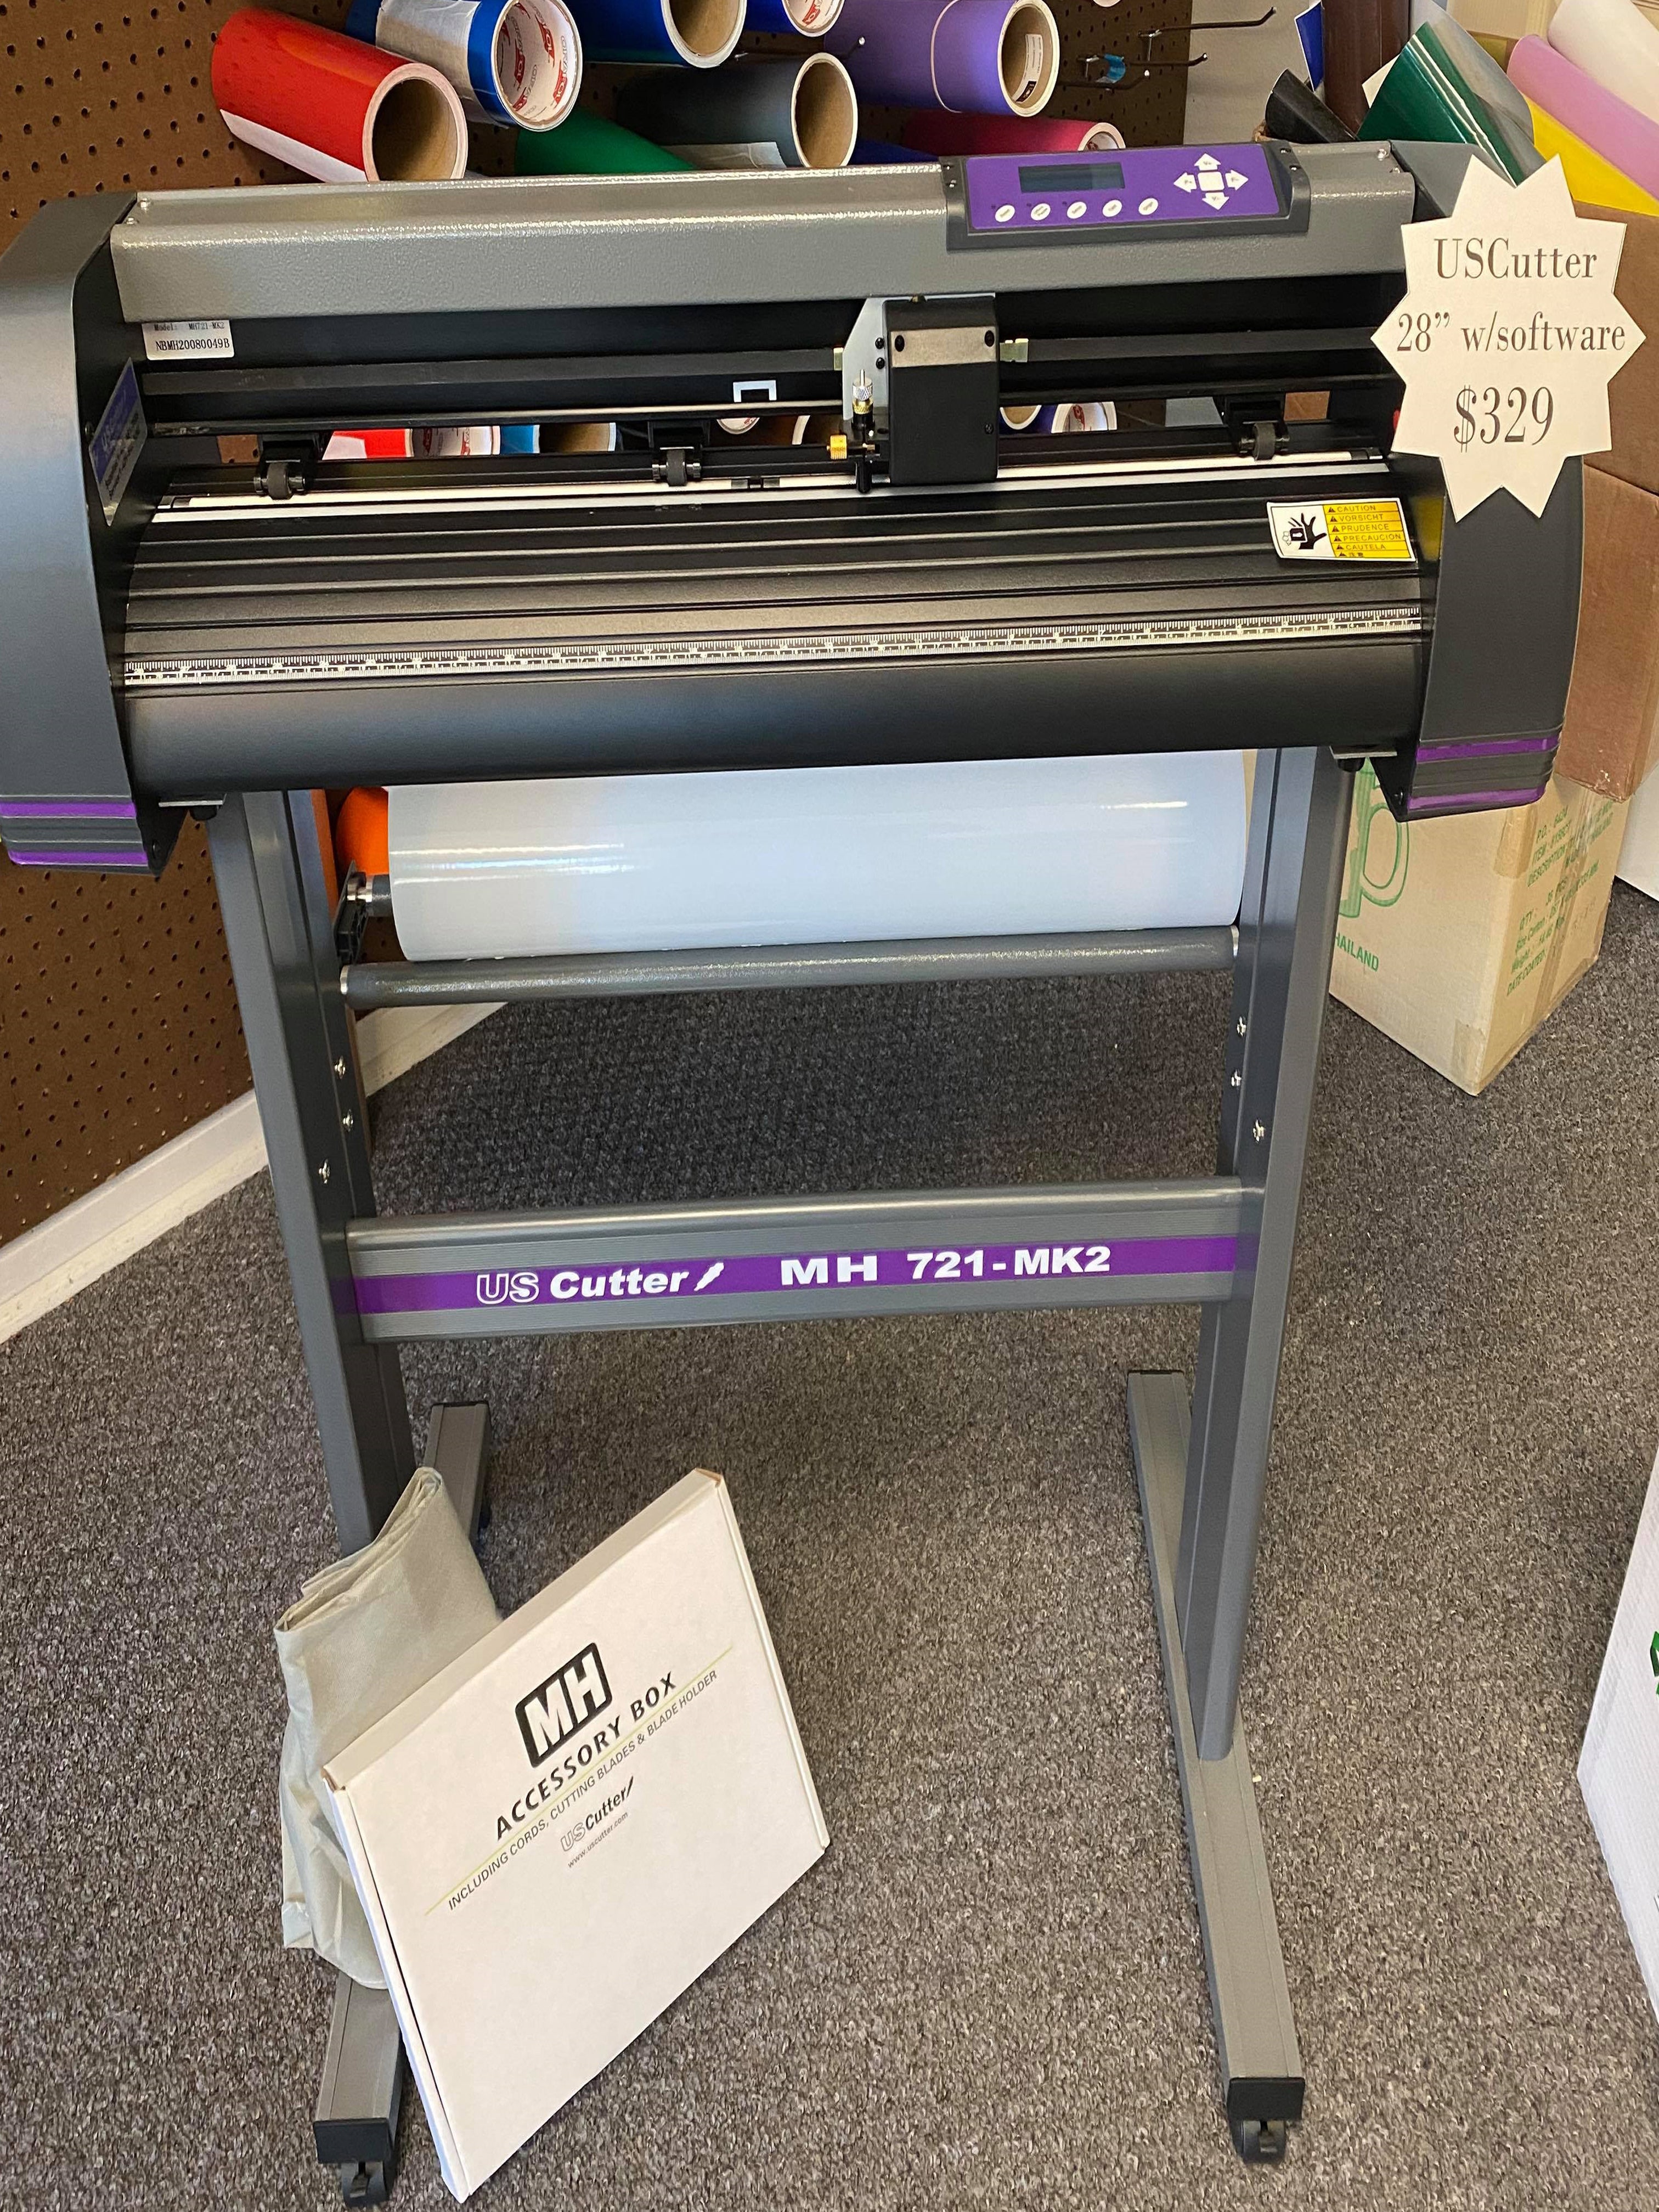 28 Vinyl Cutter with Stand with Cutter Software - New - www